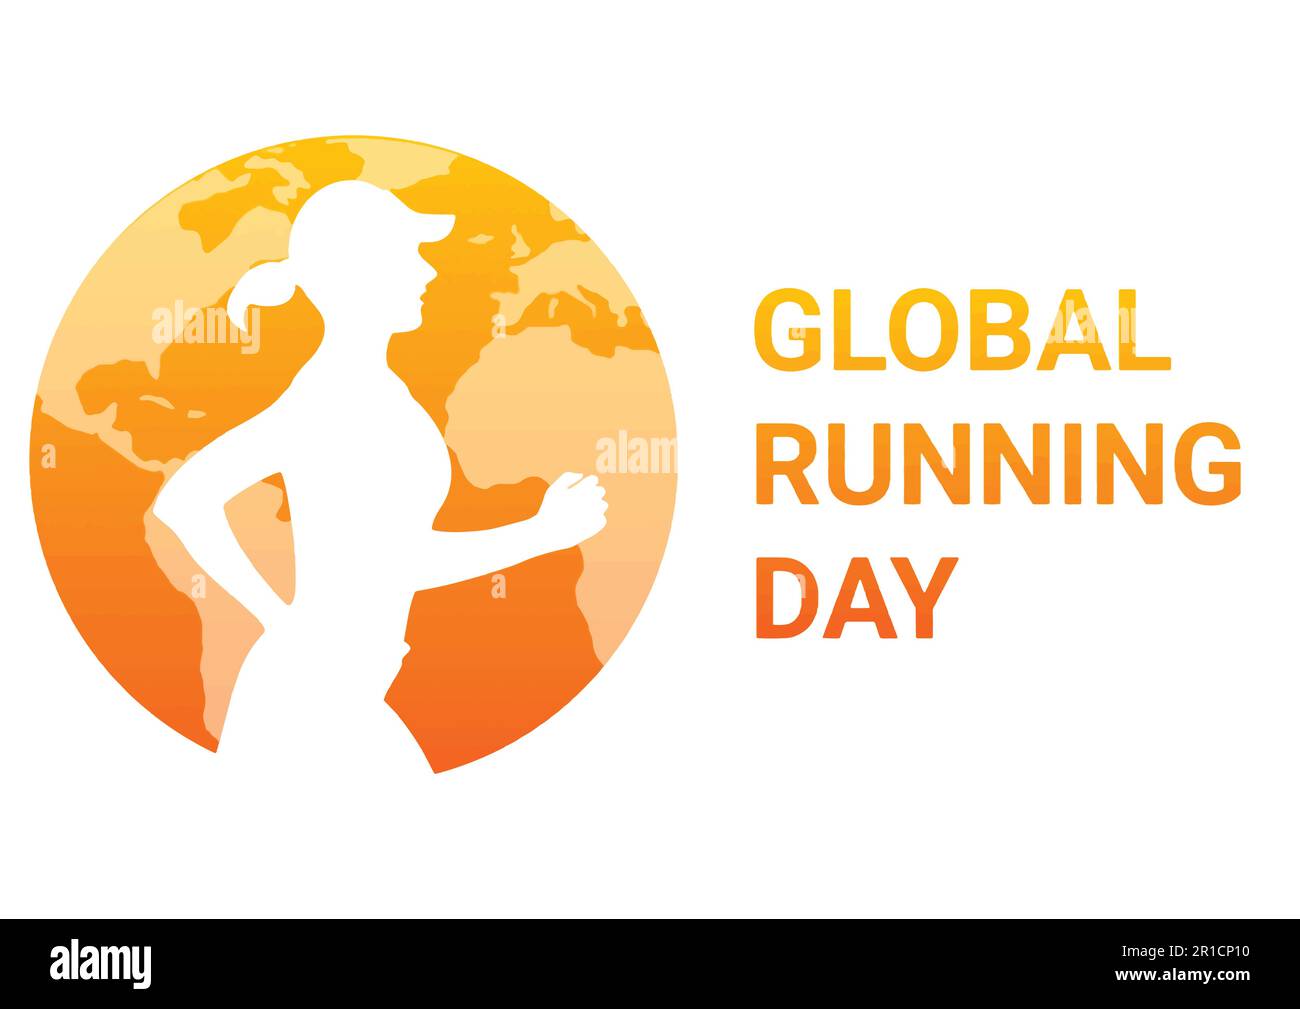 Global running day. Vector illustration. Silhouette of a woman running against the background of the globe. Stock Vector